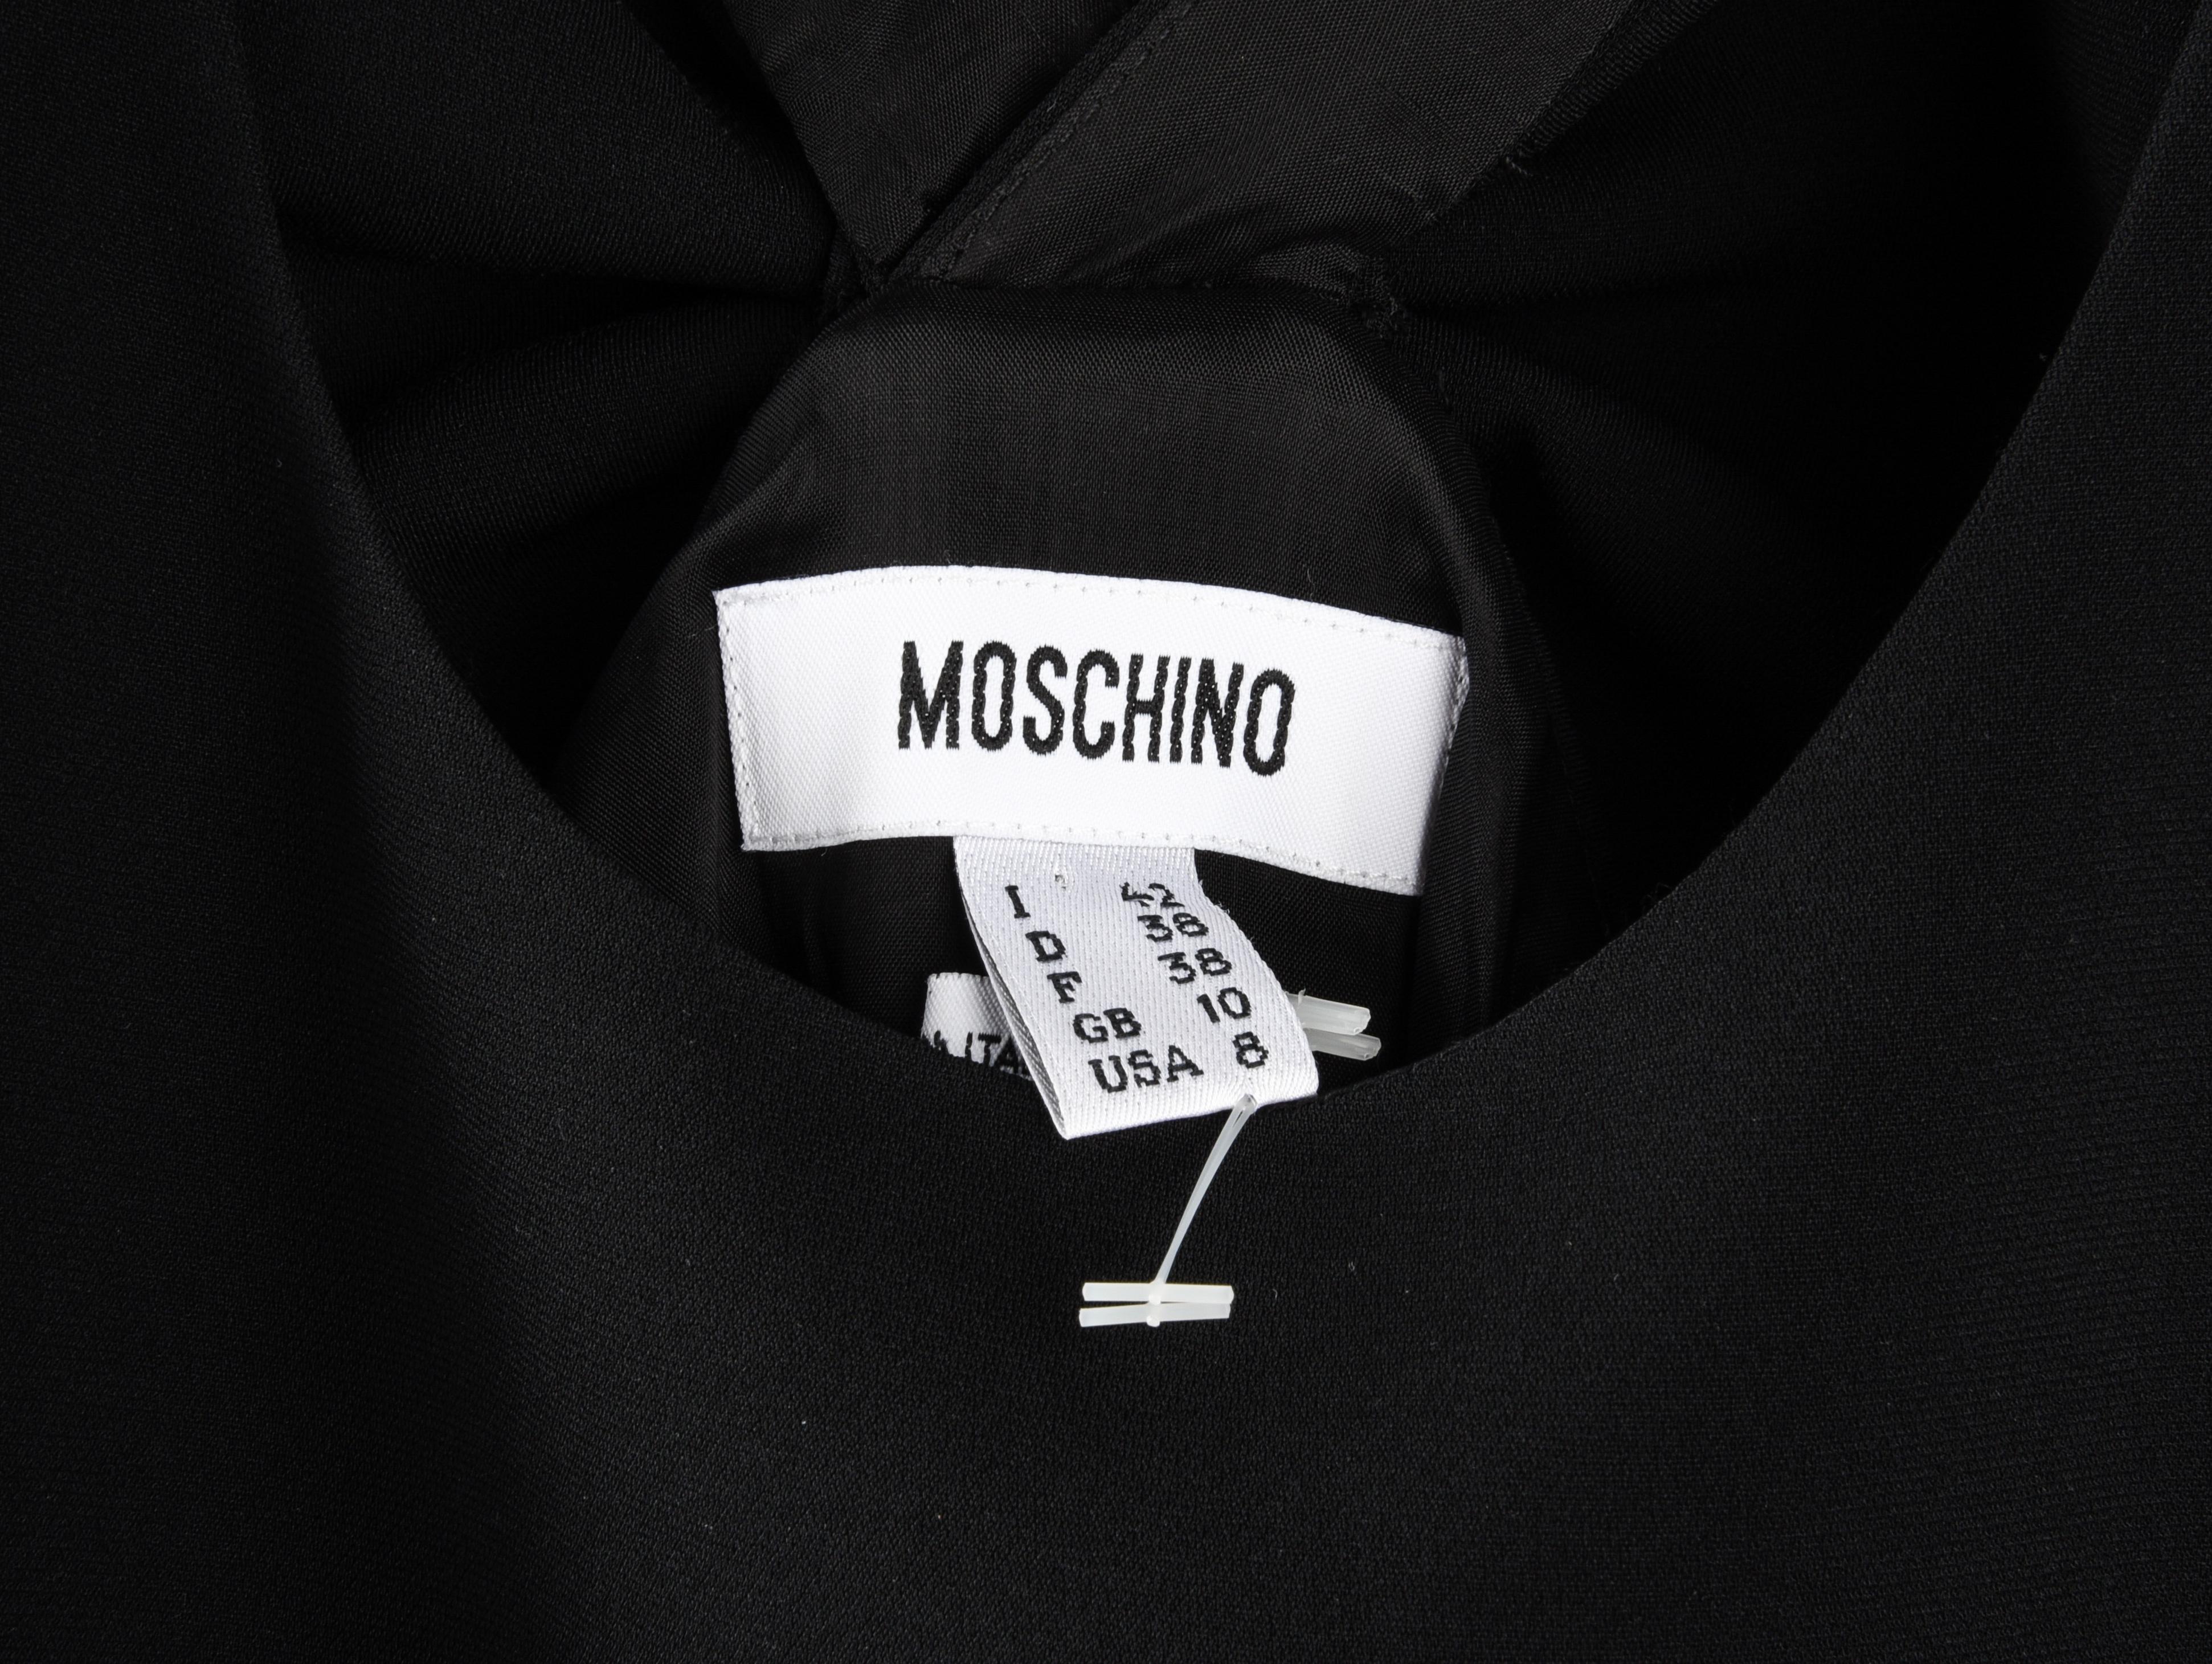 Moschino Dress Black Racer Cut Shoulder Rear Bow and Pleat Detail 42 / 8  5